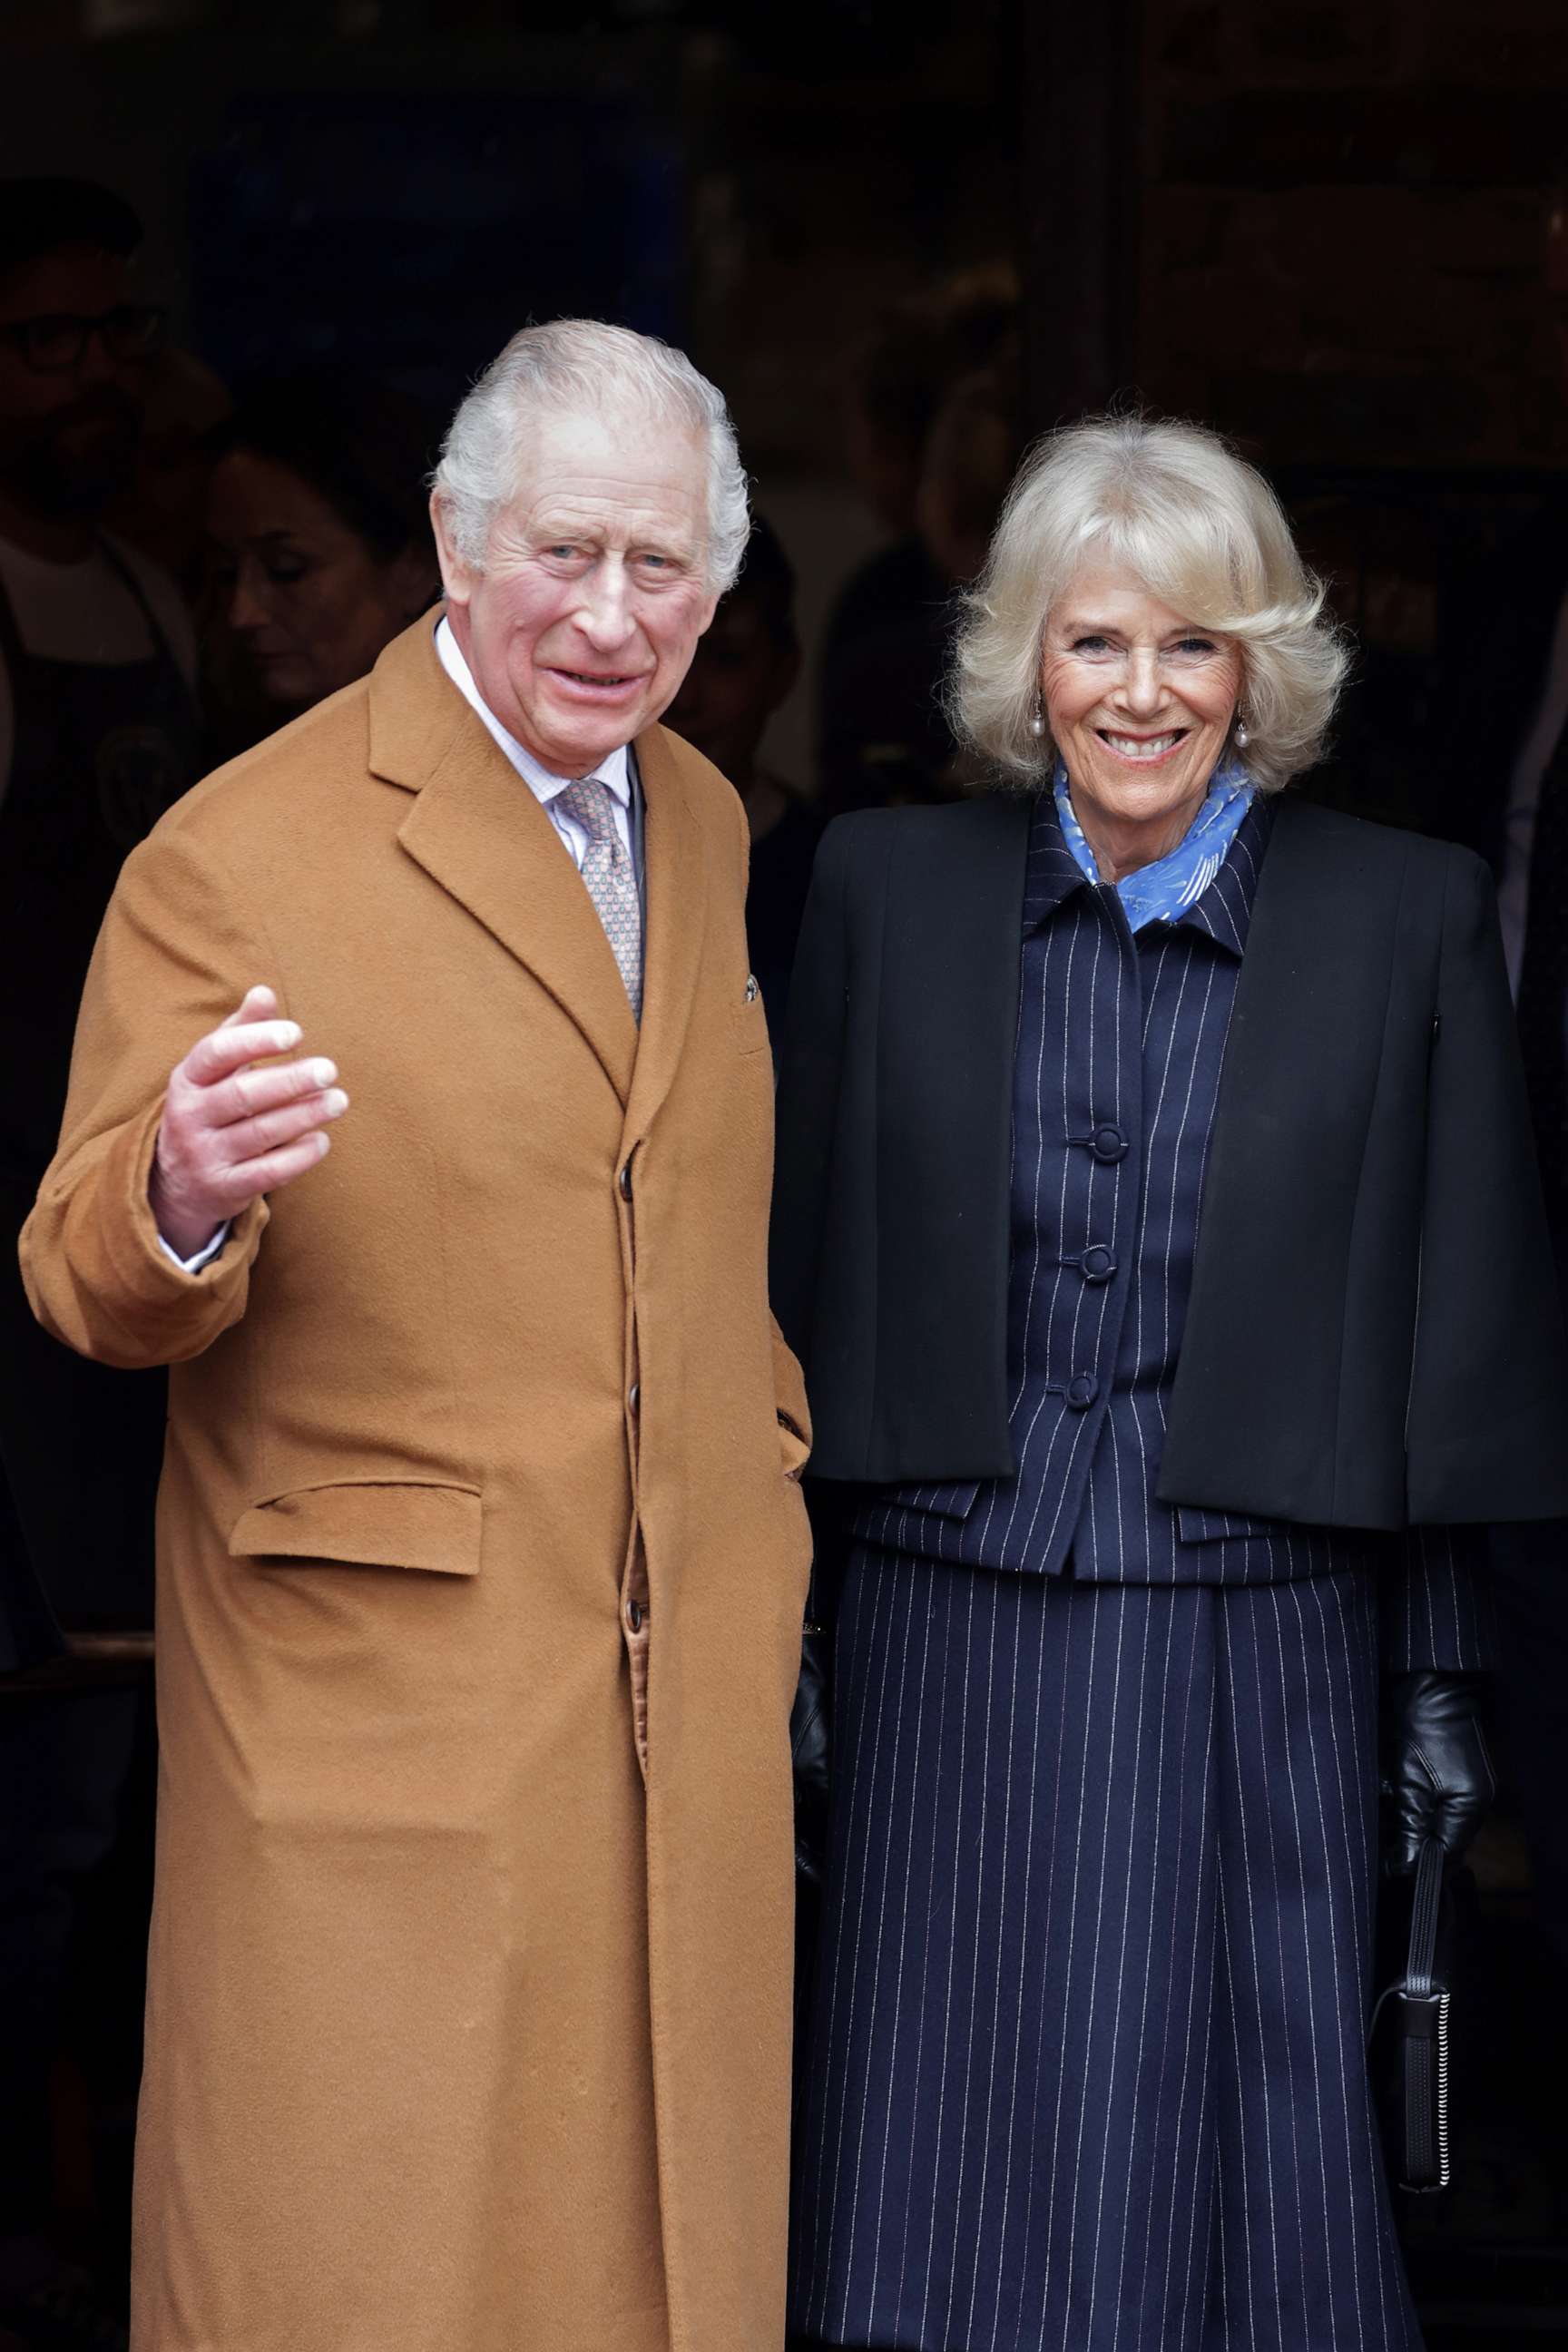 PHOTO: King Charles III and Camilla, Queen Consort visit the Talbot Yard food court on April 5, 2023 in Malton, England.